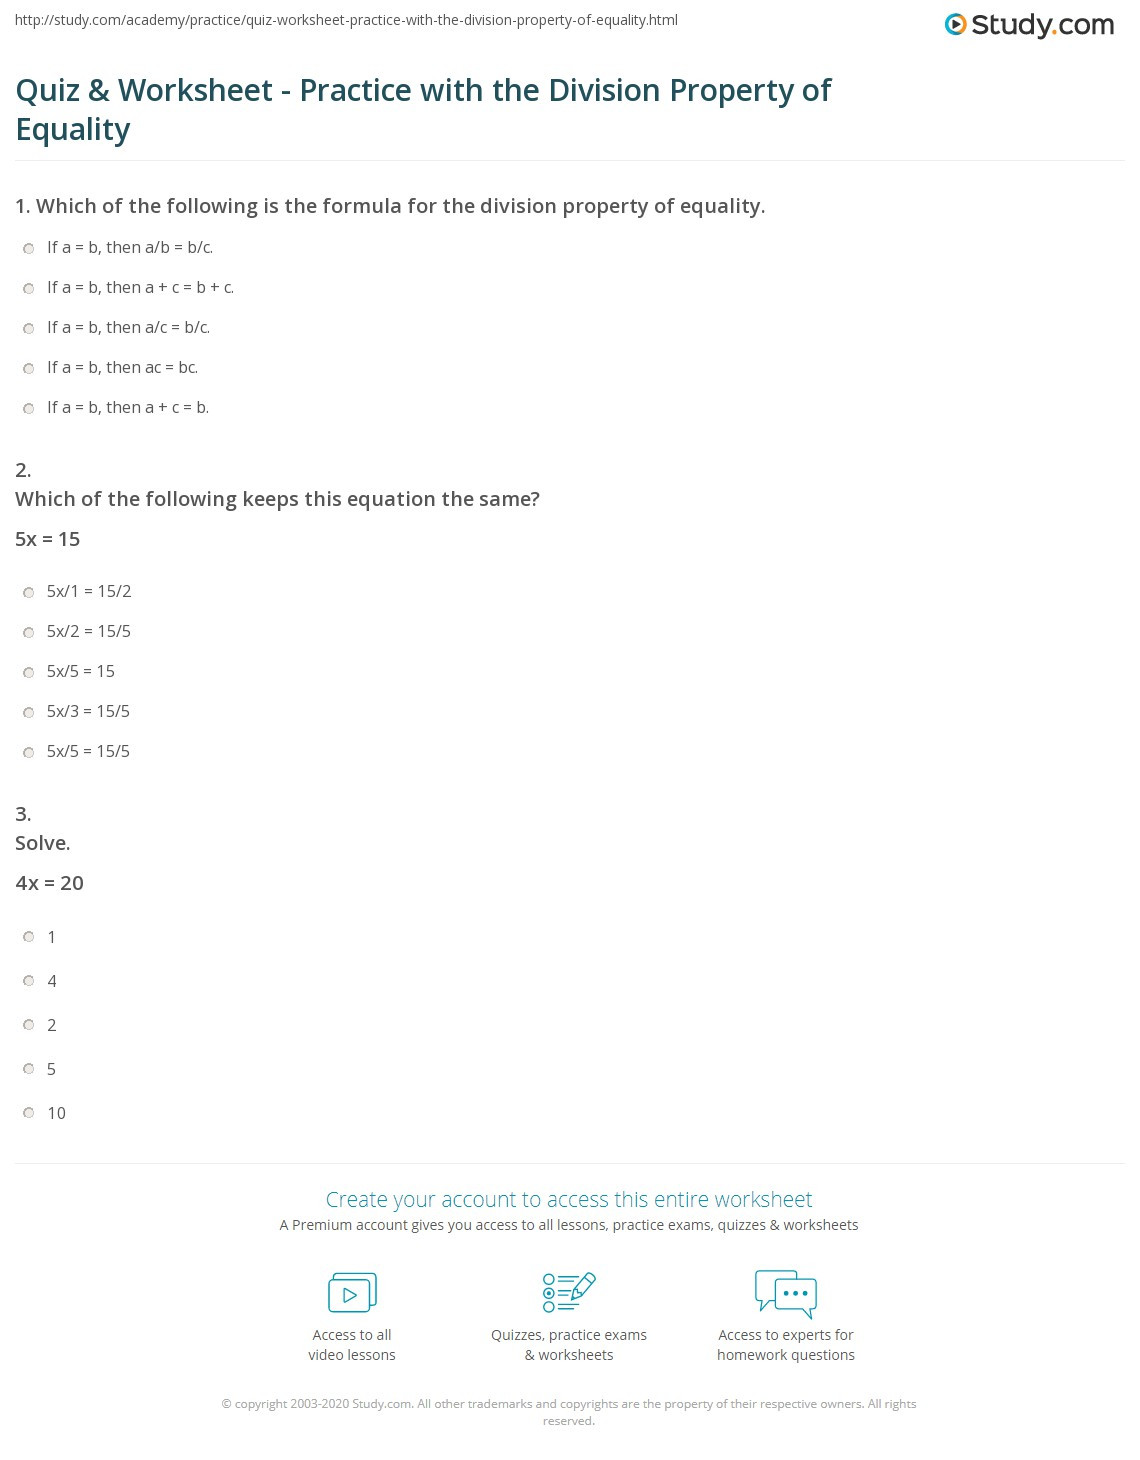 Properties Of Numbers Worksheet Quiz &amp; Worksheet Practice with the Division Property Of